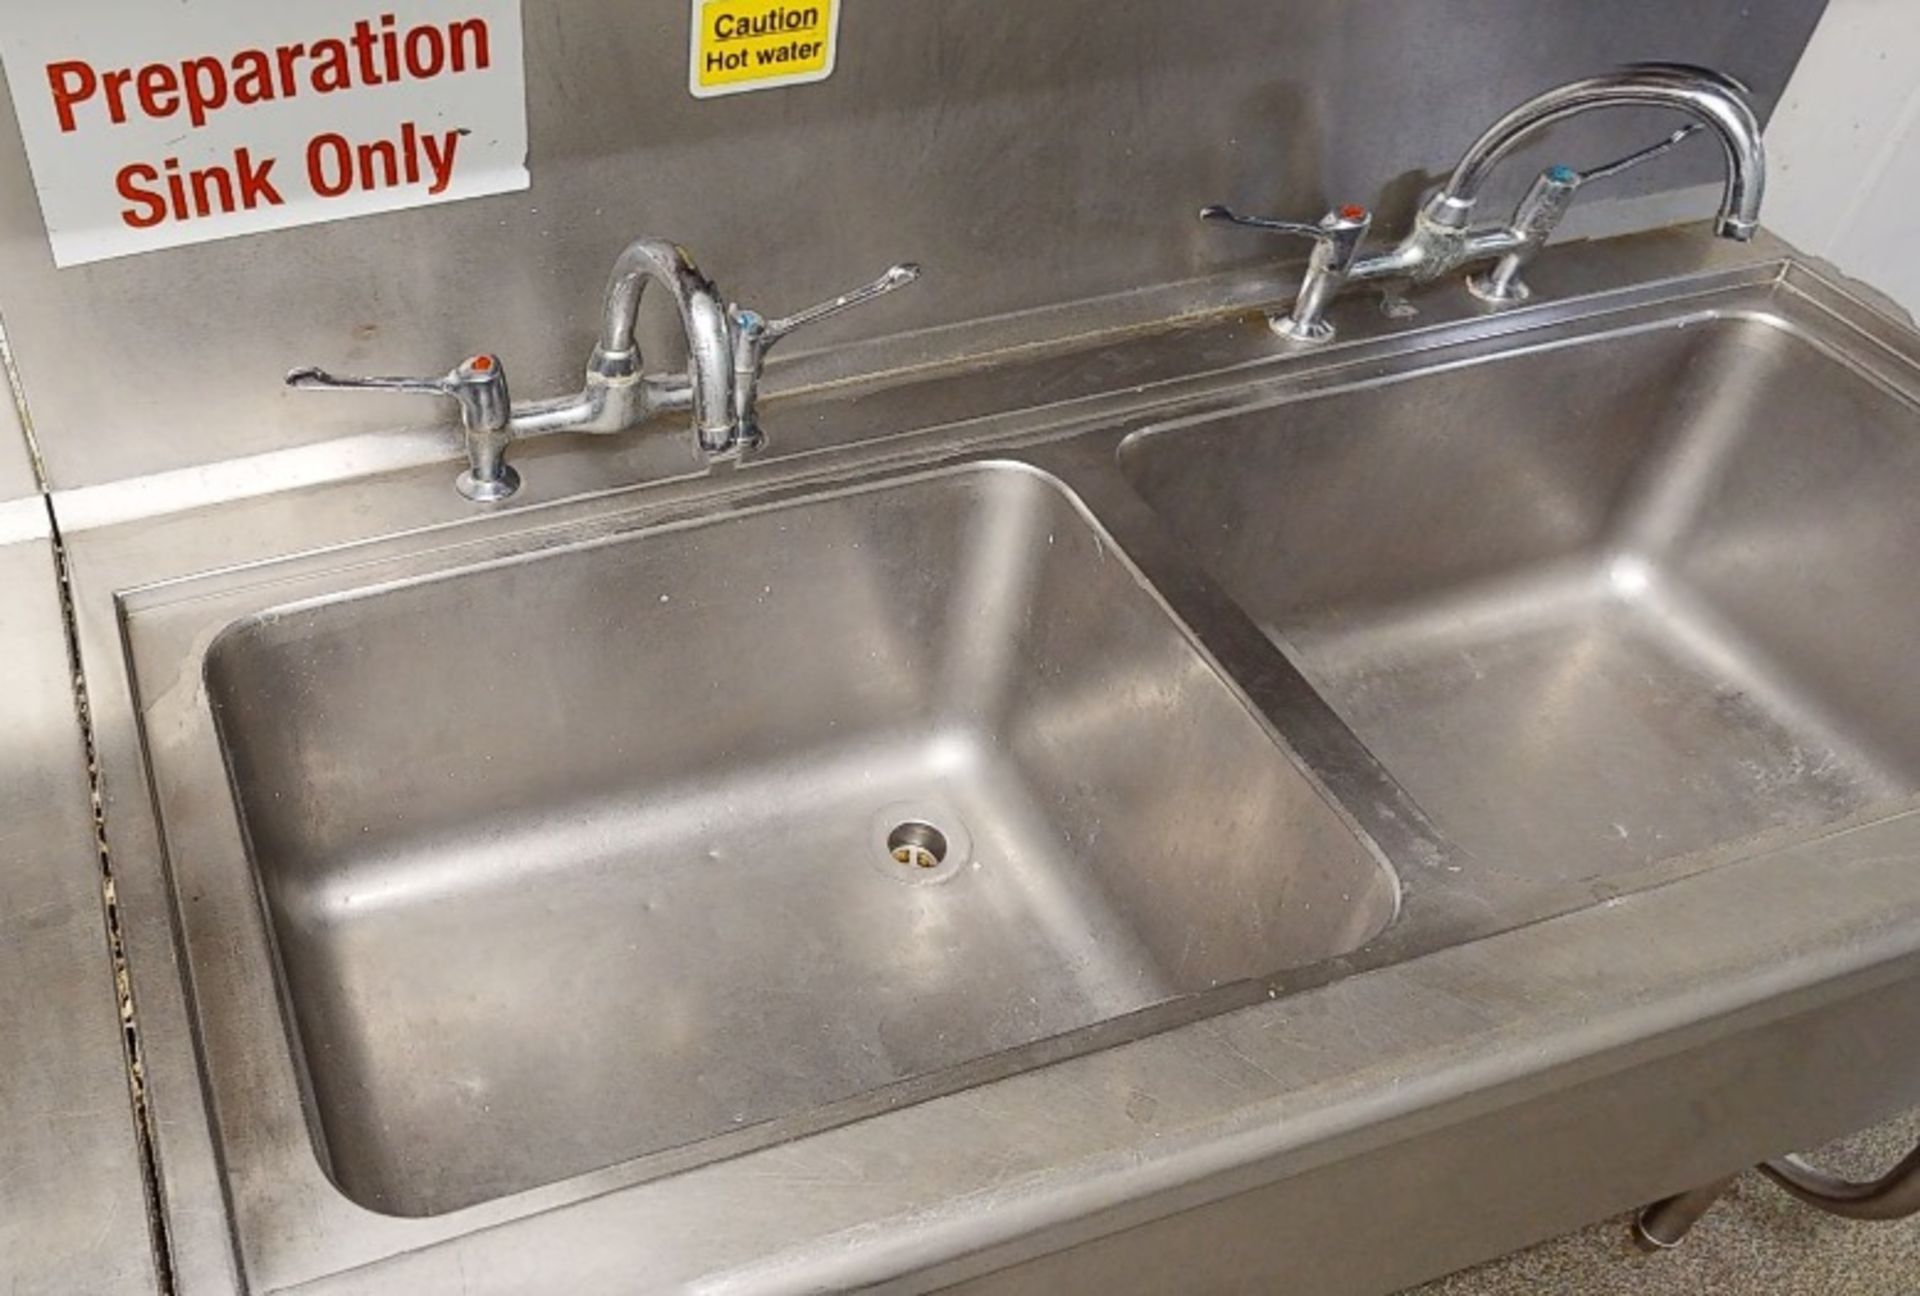 1 x Stainless Steel Commercial Wash Stand With Twin Sink Basins, Mixer Taps, Overhead Shelves, - Image 4 of 10